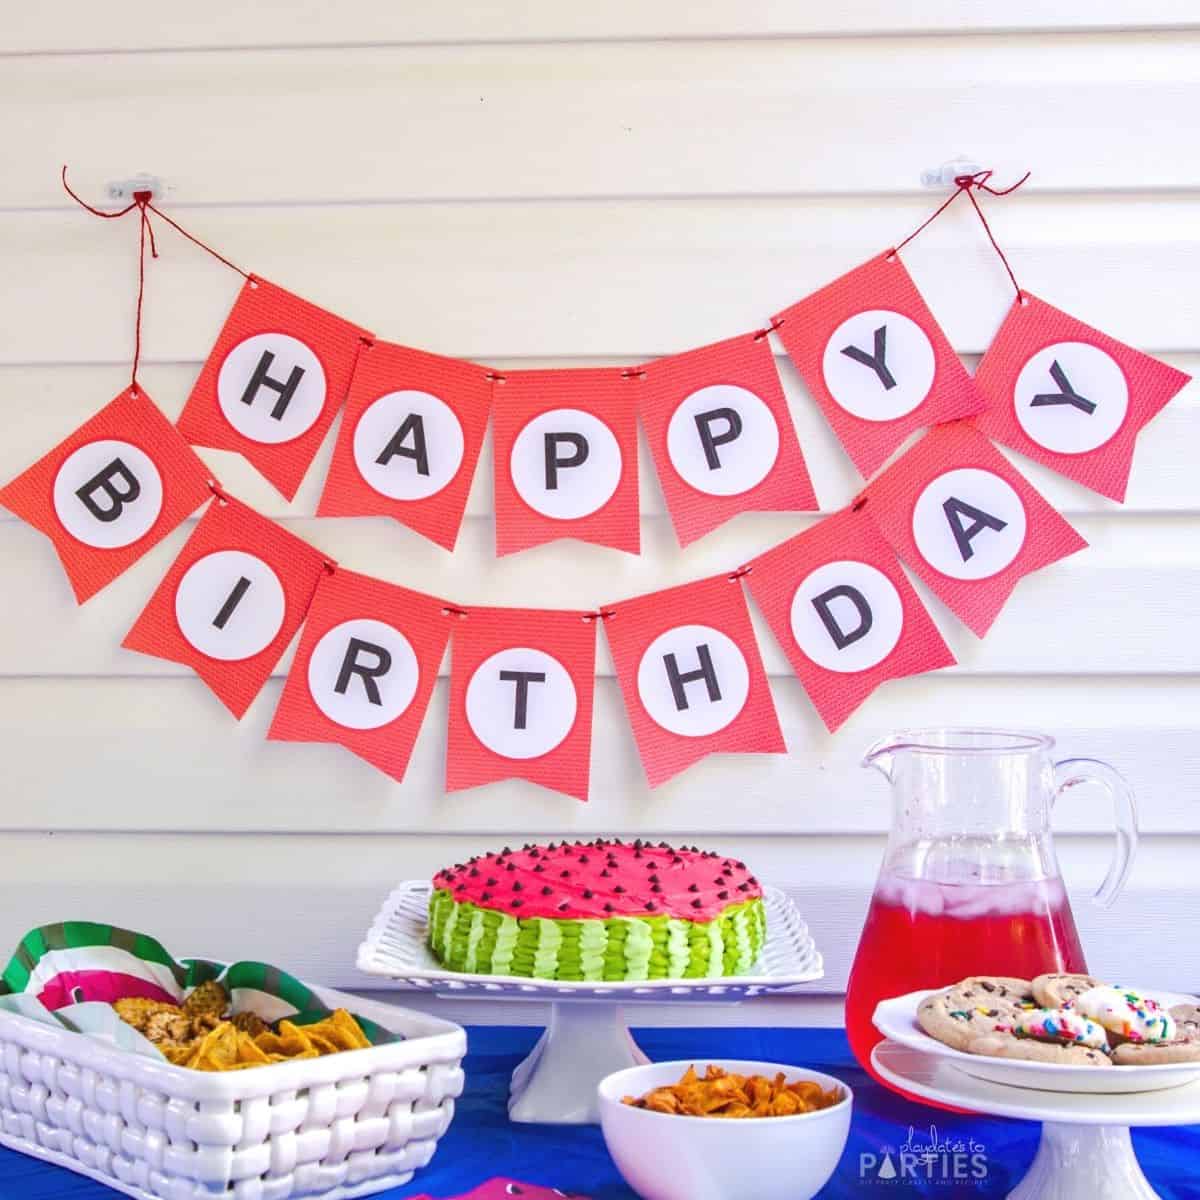 A red and white happy birthday banner behind a watermelon cake and snacks on a party table.